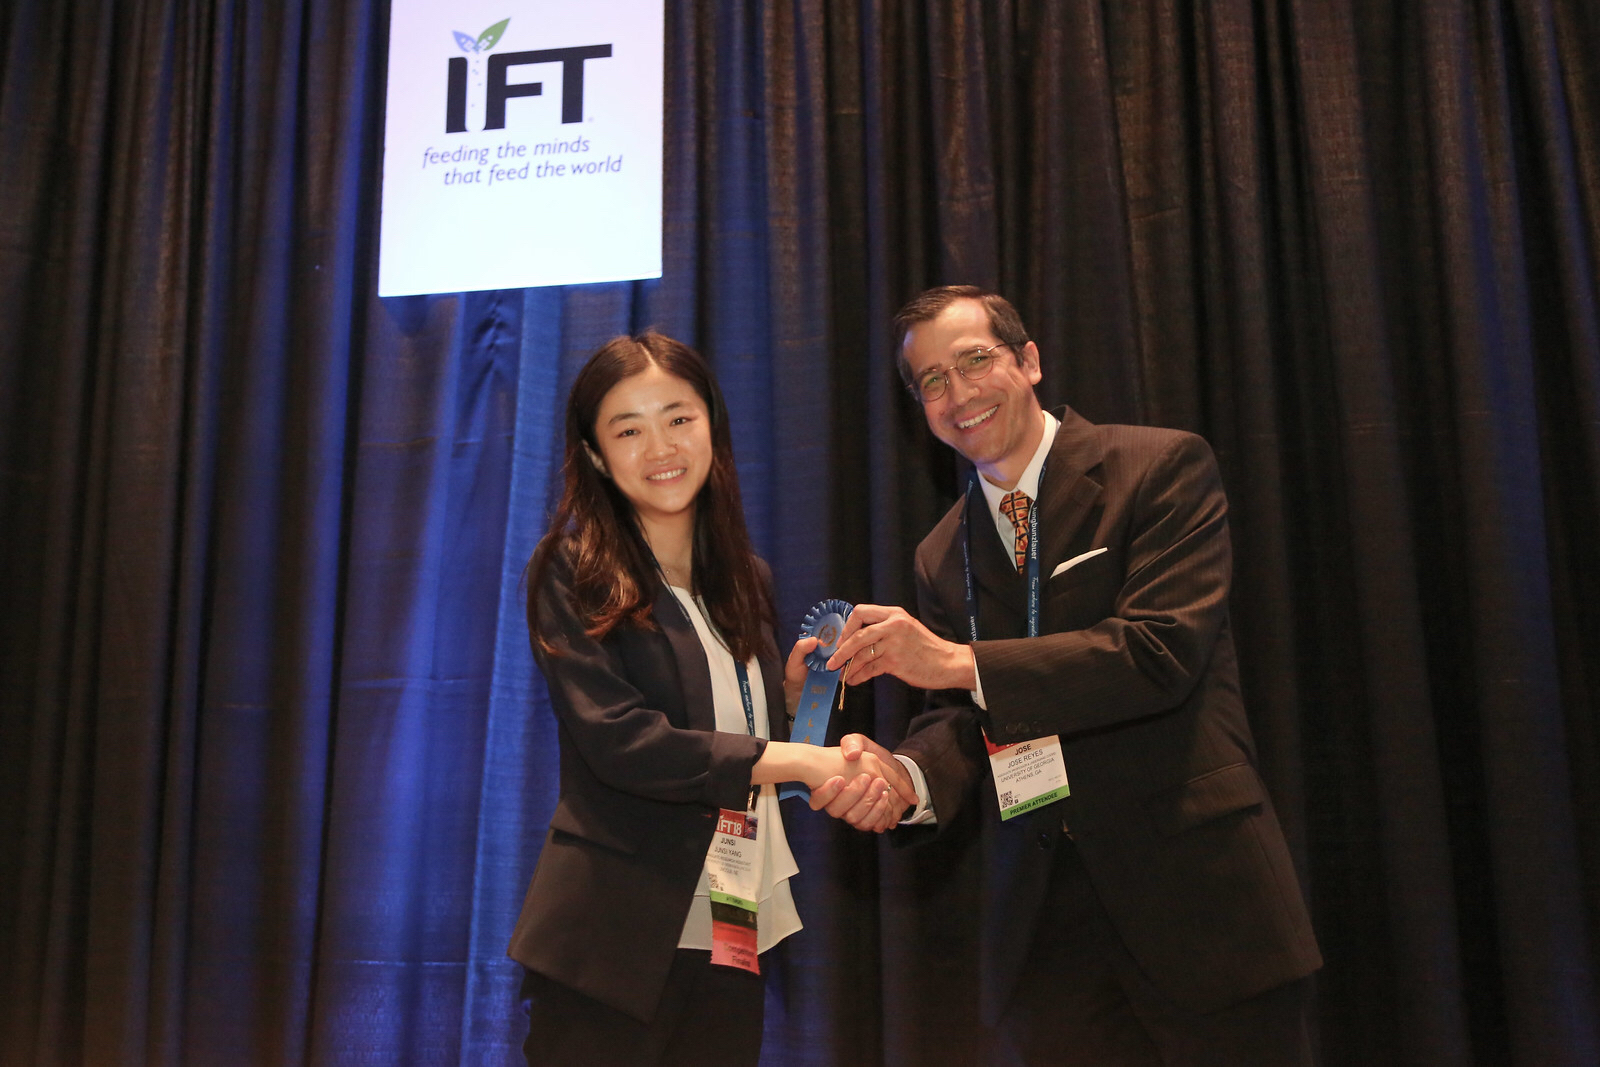 Jessica while receiving the 1st place at IFT18 Student Research Paper Oral Competition.